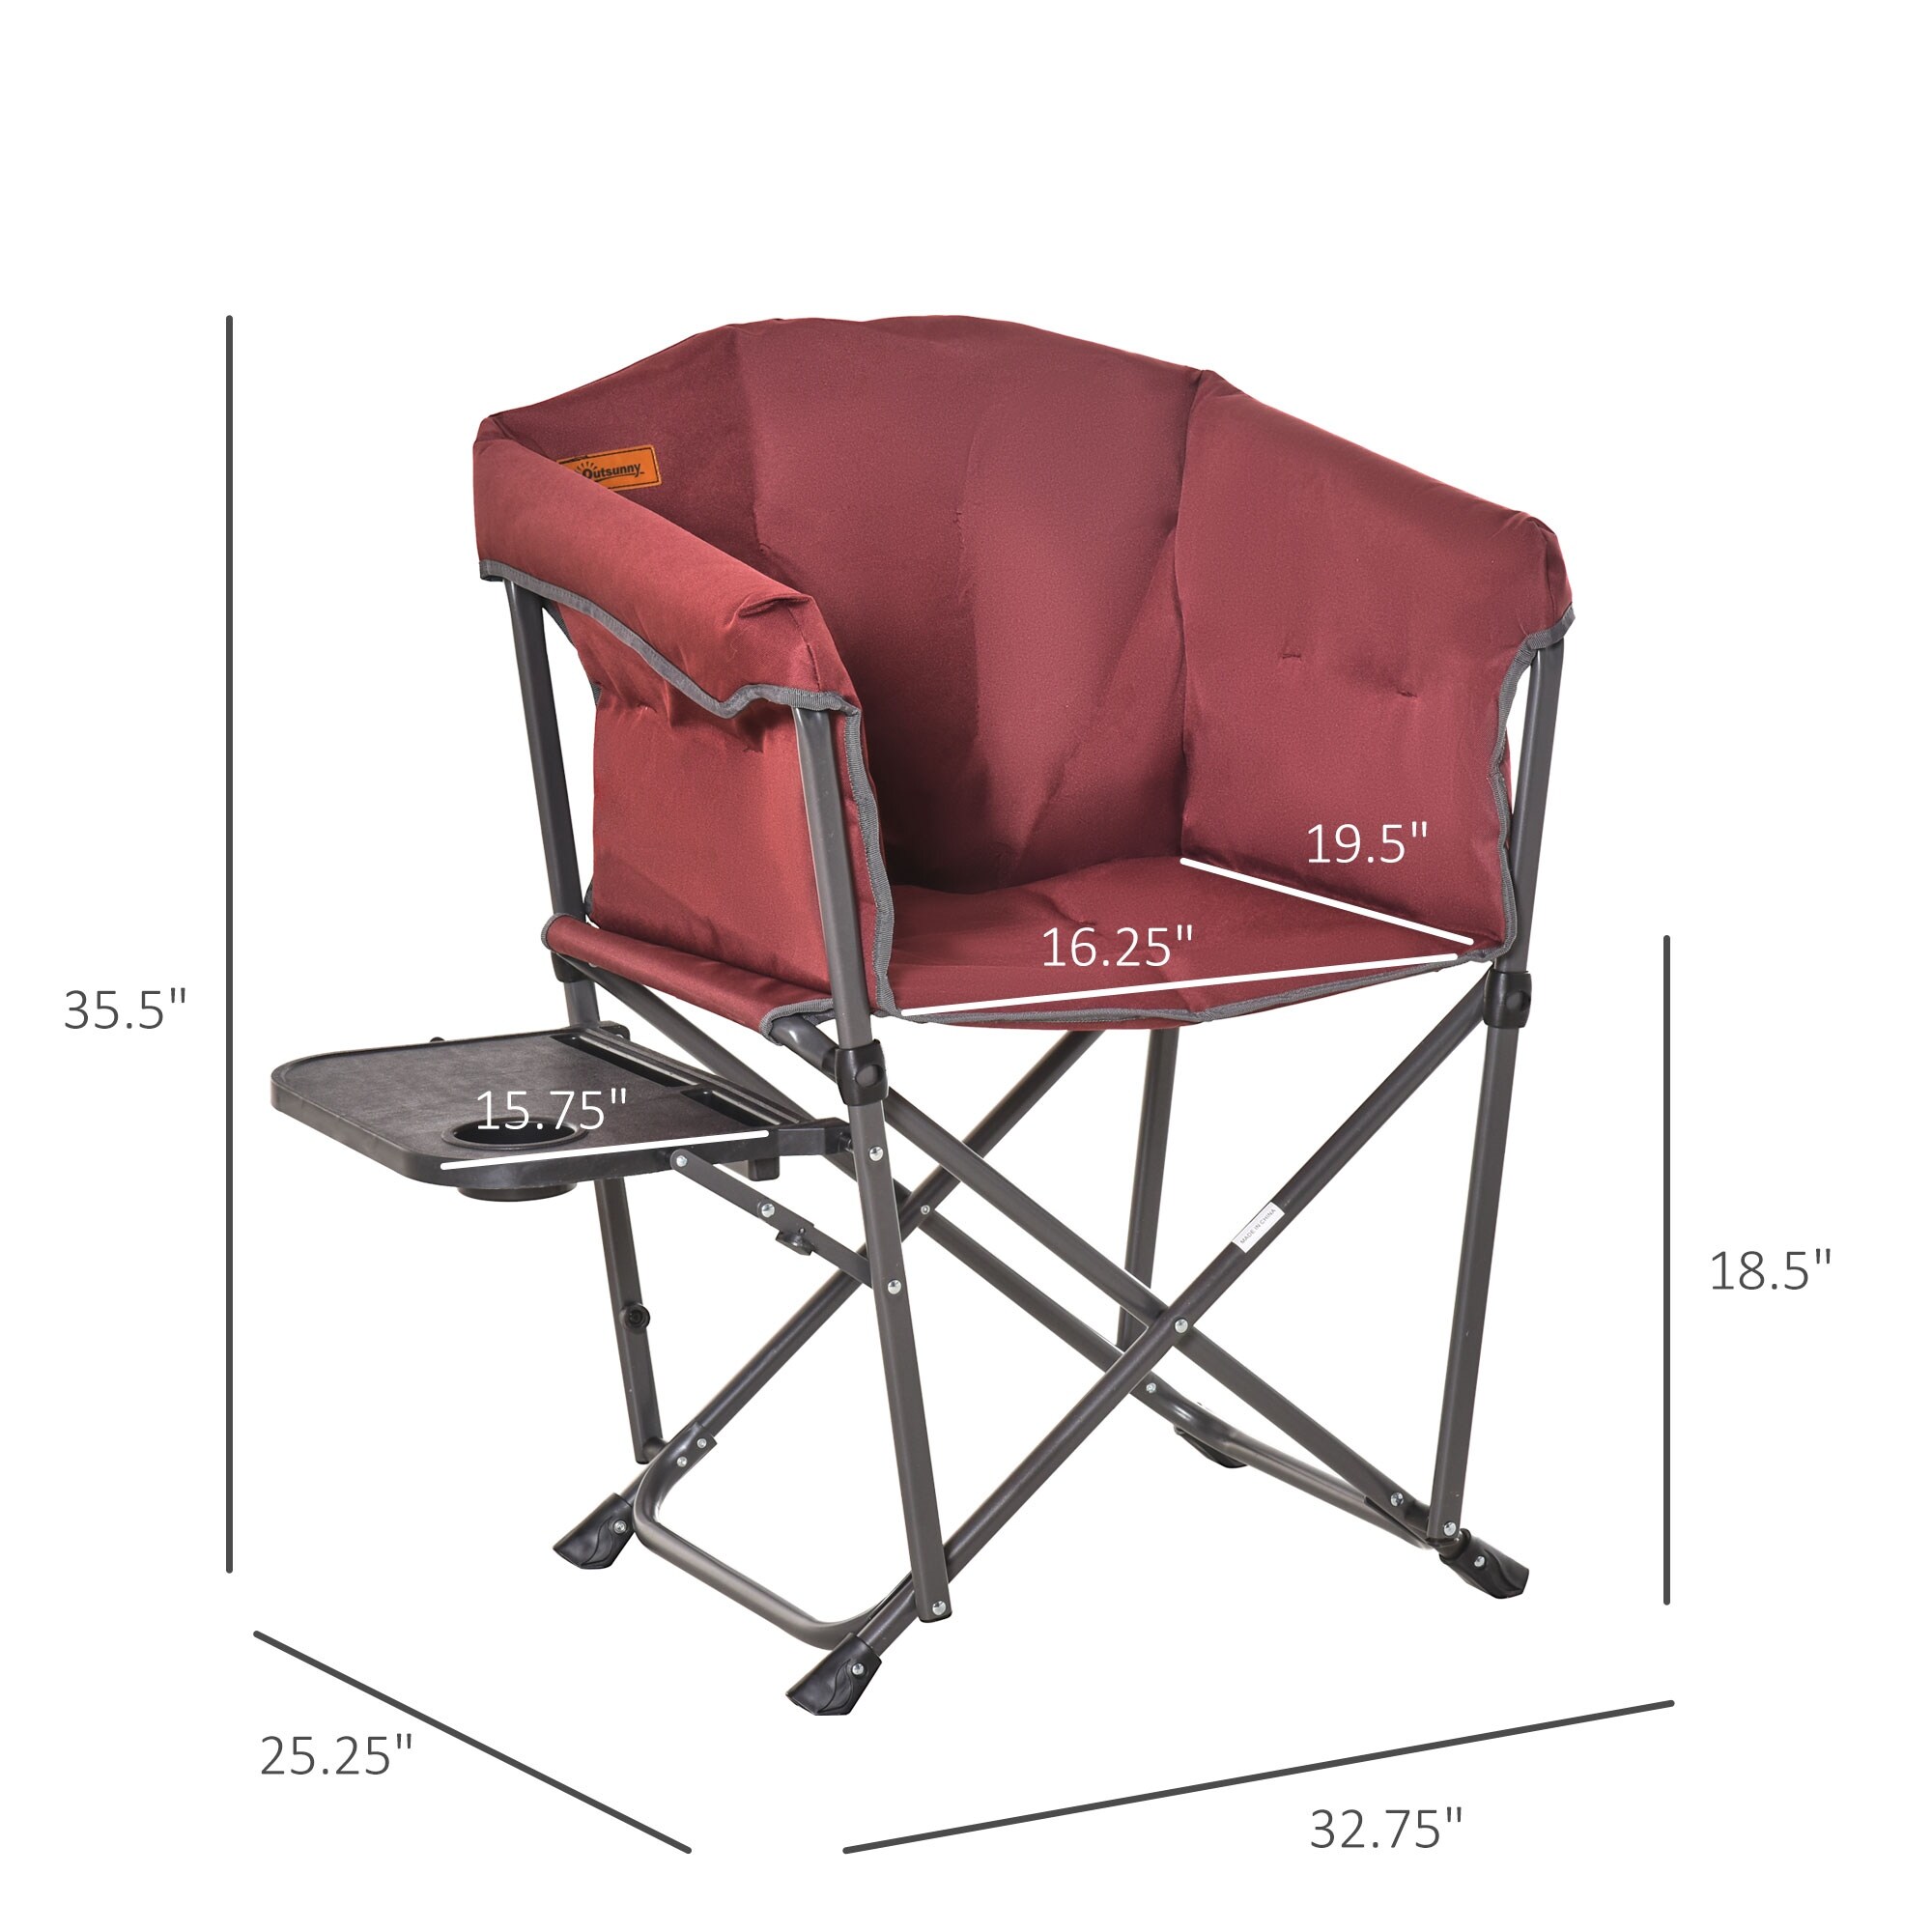 https://ak1.ostkcdn.com/images/products/is/images/direct/751bd6eb2f60d059871bb20ee81095f90b9c9410/Outsunny-Heavy-Duty-Camping-Folding-Director-Chair-Oversize-Padded-Seat-w--Side-Table-Compact-and-Sturdy-for-Outdoor.jpg